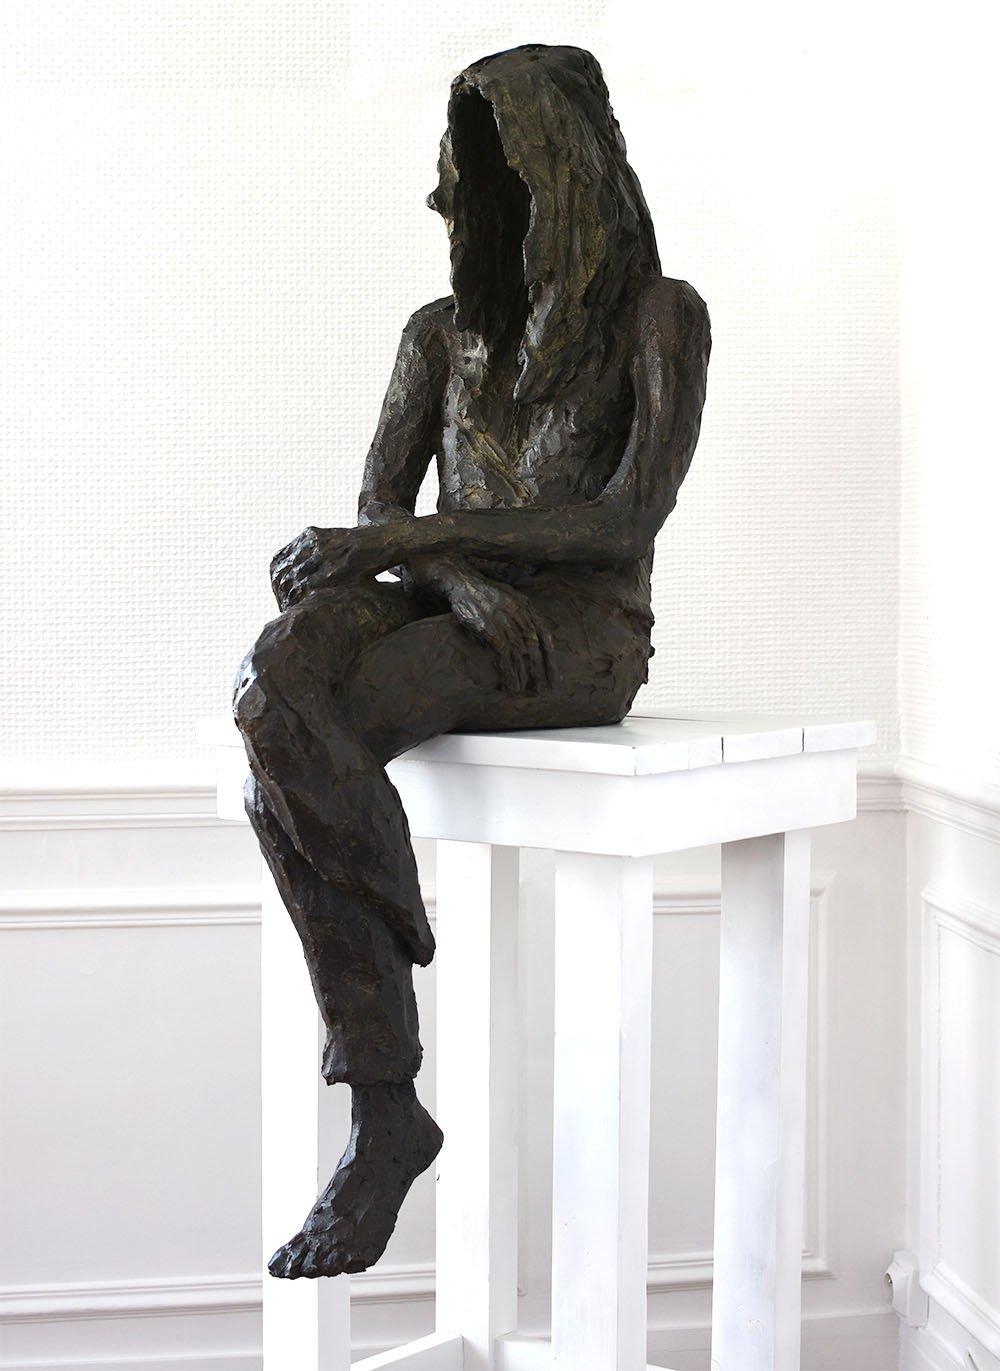 Girl’s dream is a bronze sculpture by French contemporary artist Cécile Raynal, dimensions are 155 × 50 × 63 cm (61 × 19.7 × 24.8 in). Dimensions include white wood stand.
The sculpture is signed and numbered, it is part of a limited edition of 8